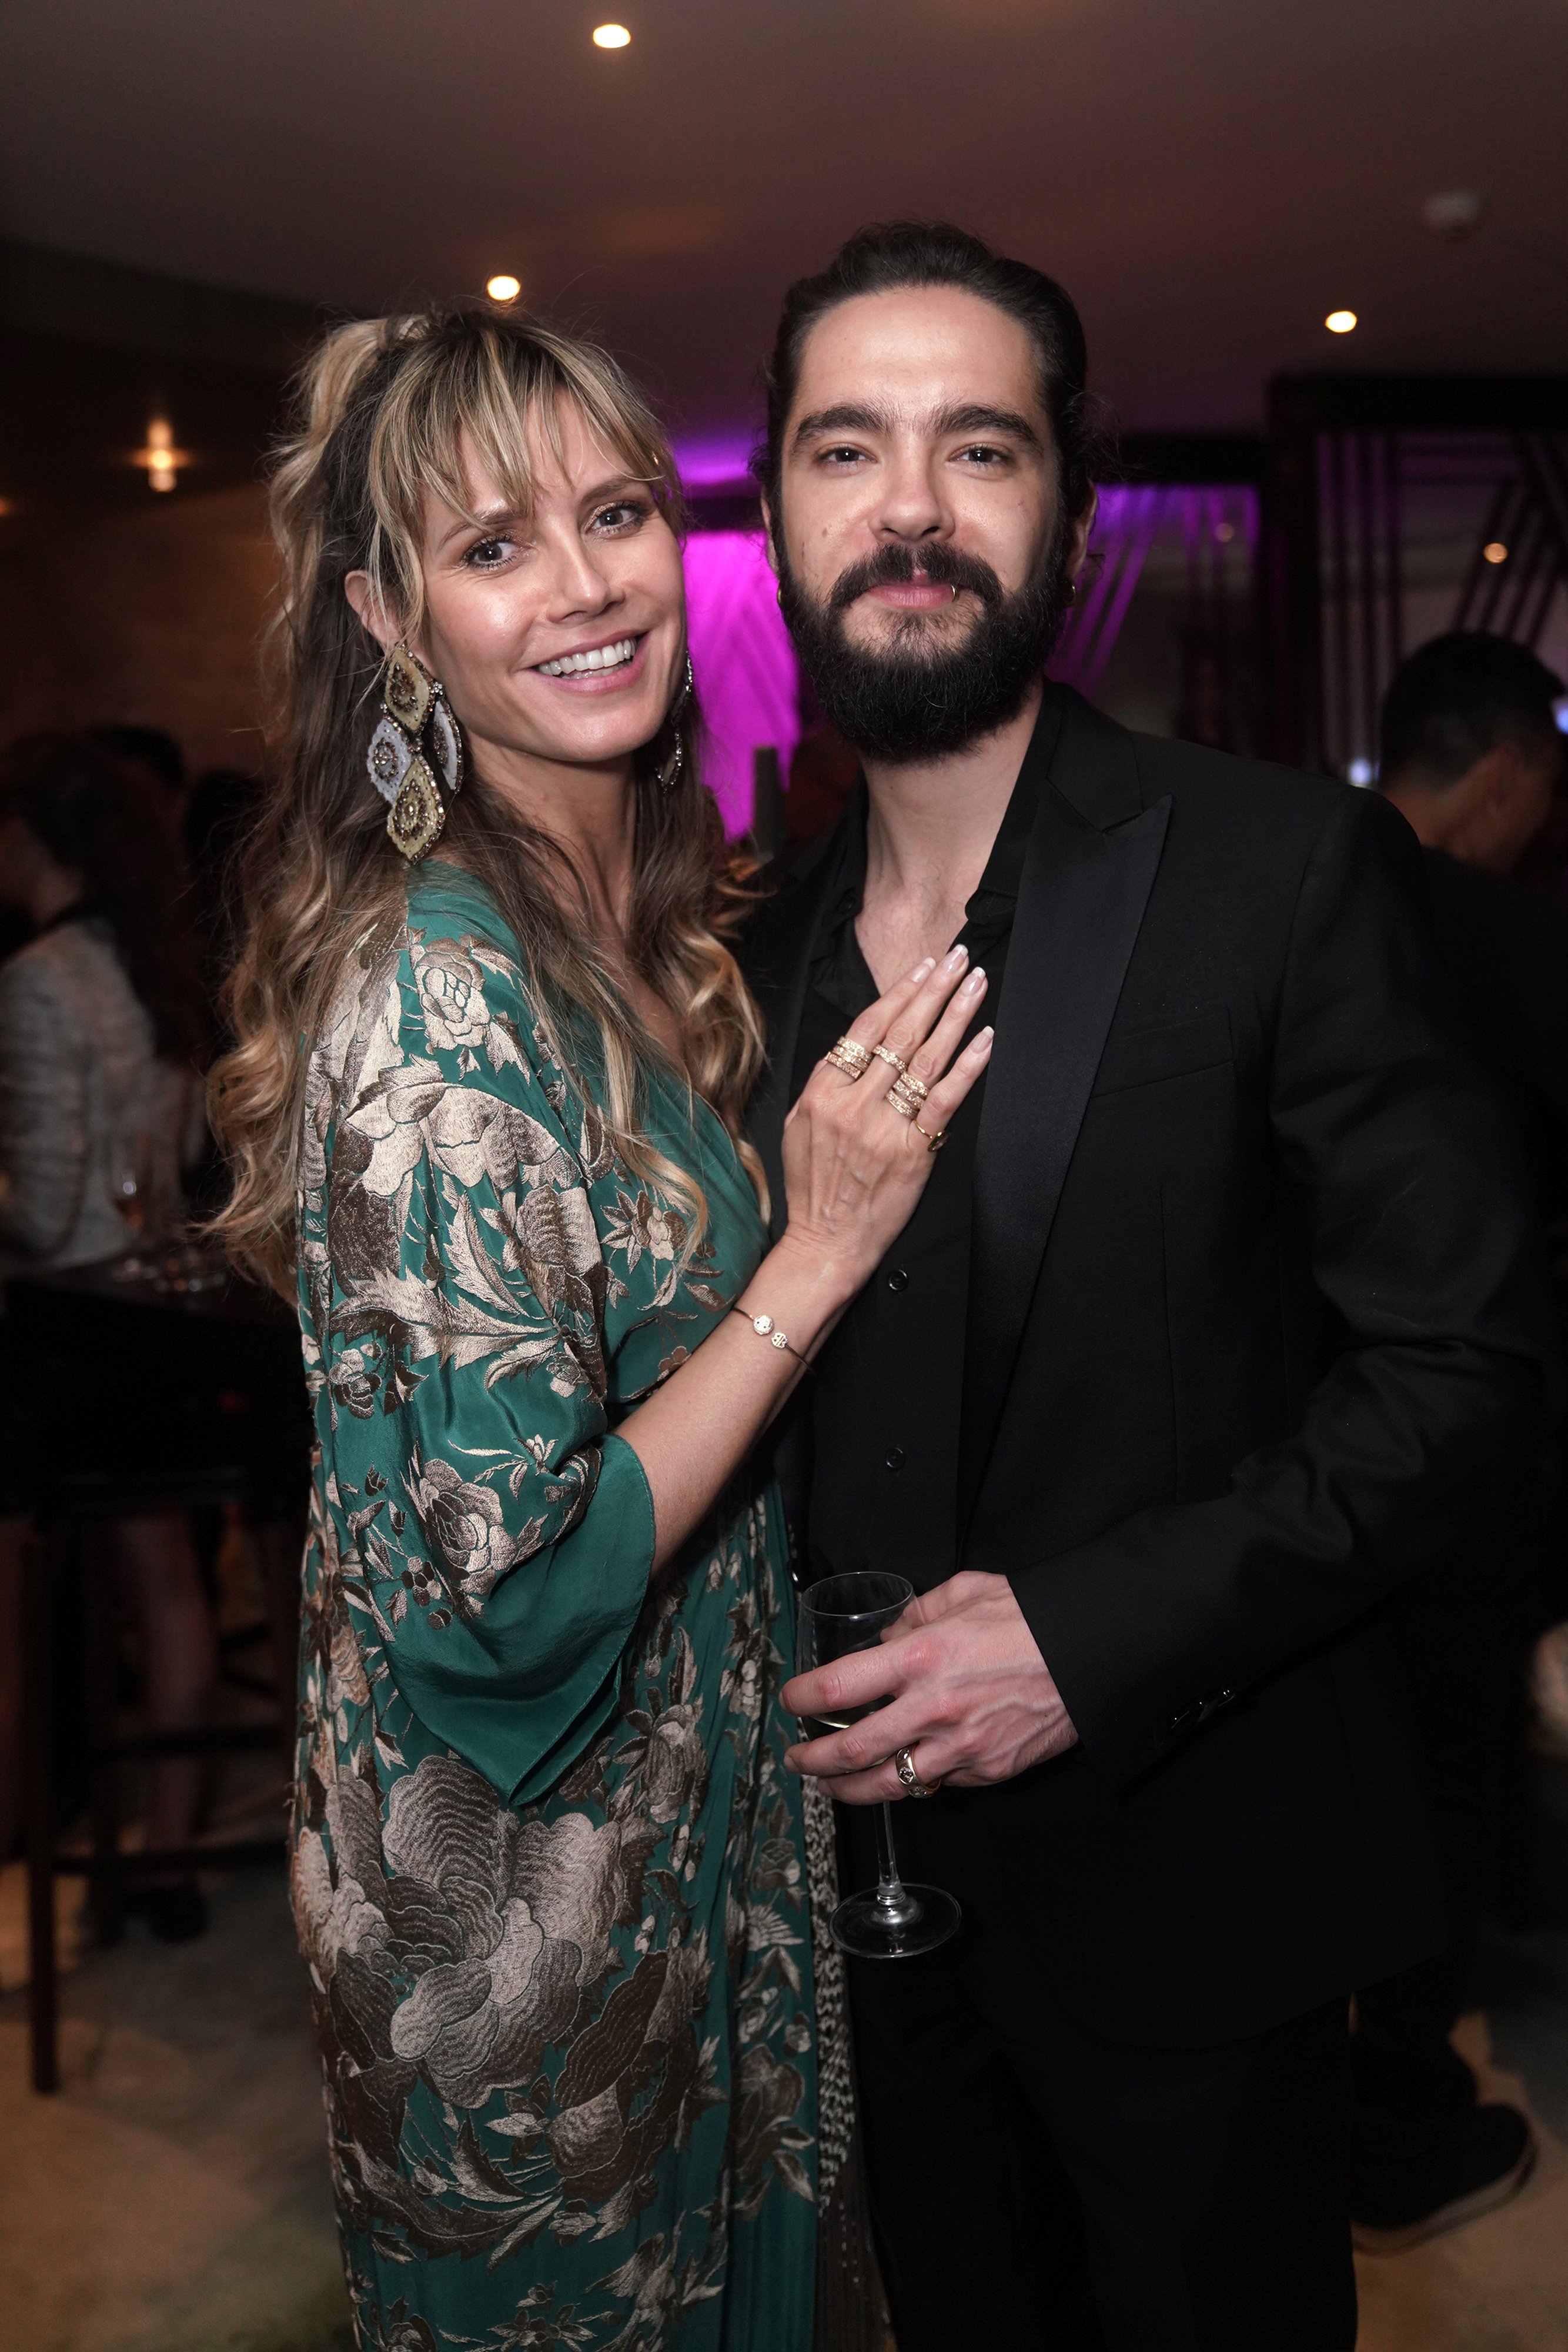 Heidi Klum and Tom Kaulitz attend the celebrating party of The Jewelry of Lorraine Schwartz, “Arts In All Its Forms” at Artus on March 24, 2019, in Hong Kong, Hong Kong. | Source: Getty Images.